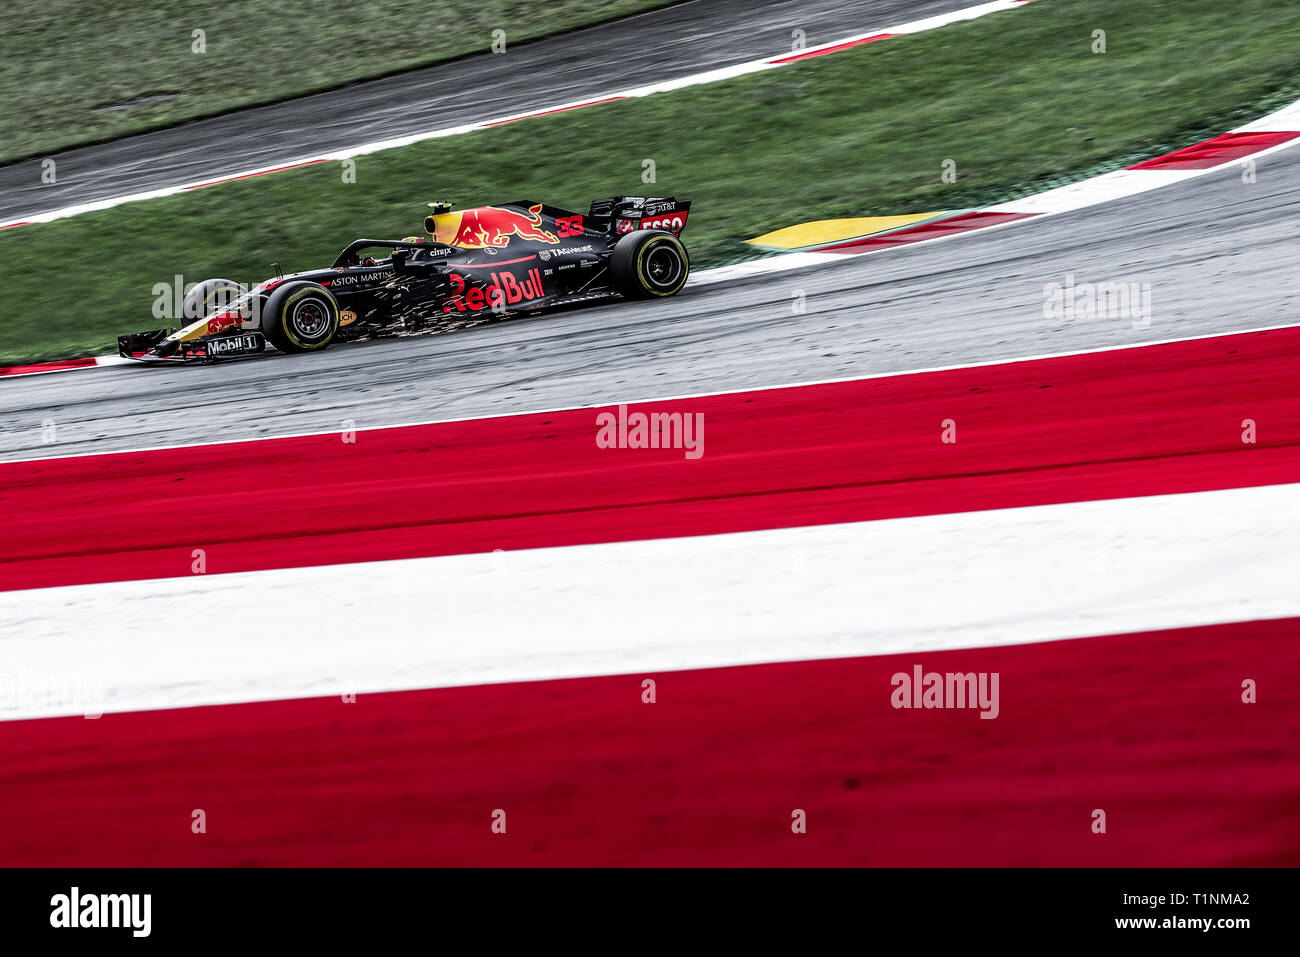 Spielberg/Austria - 06/29/2018 - #33 Max VERSTAPPEN (NDL) in his Red Bull Racing RB14 during FP2 at the Red Bull Ring ahead of the 2018 Austrian Grand Stock Photo